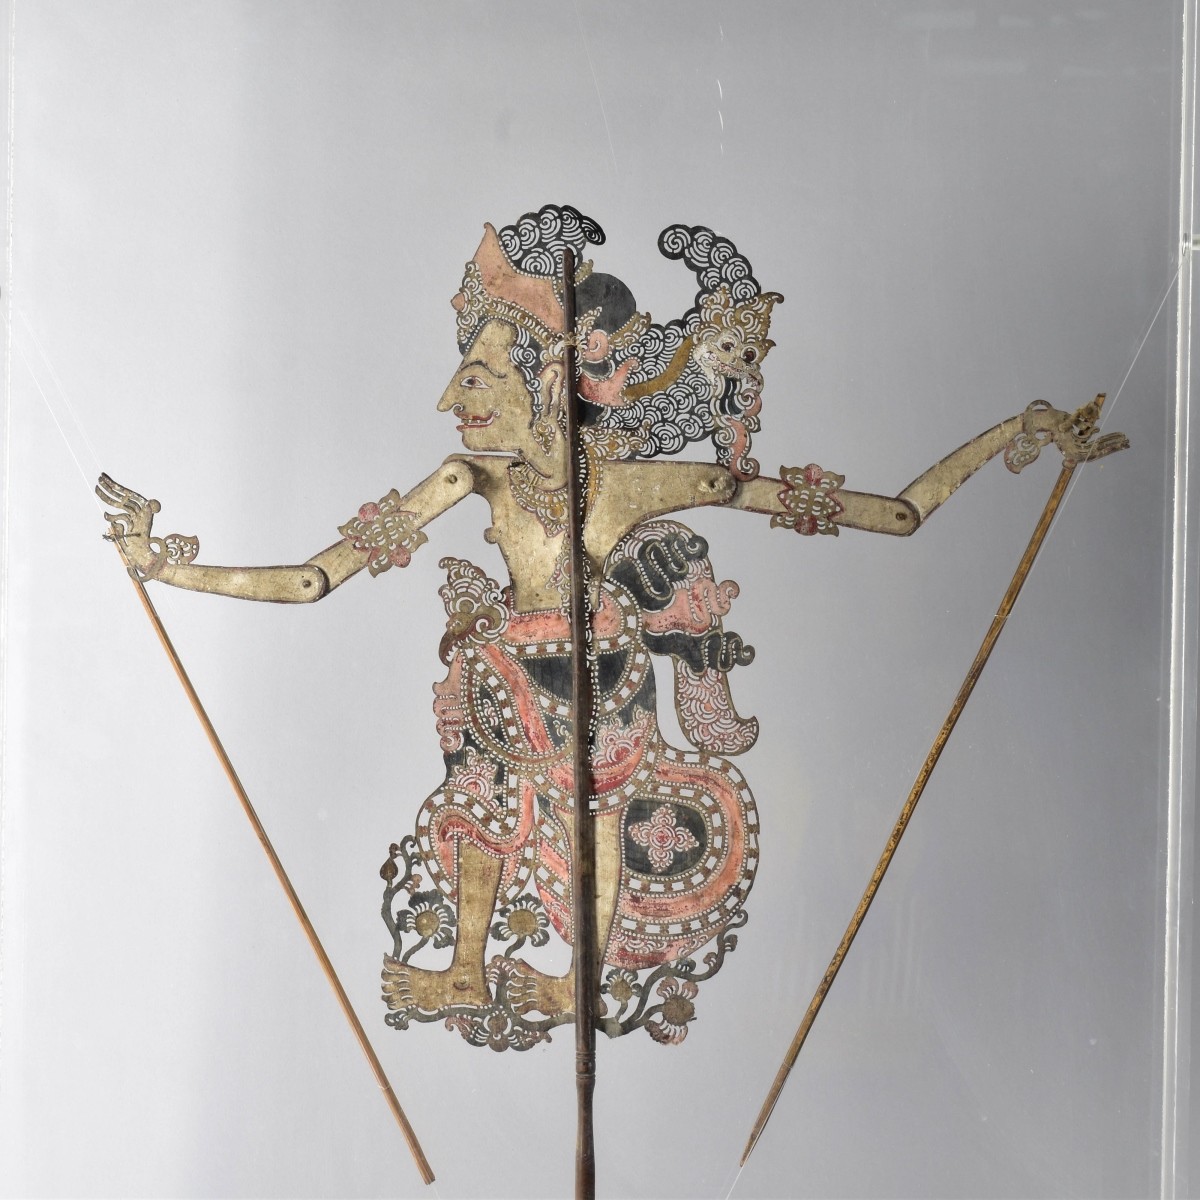 Pair of Antique Thai Puppets in Display Cases